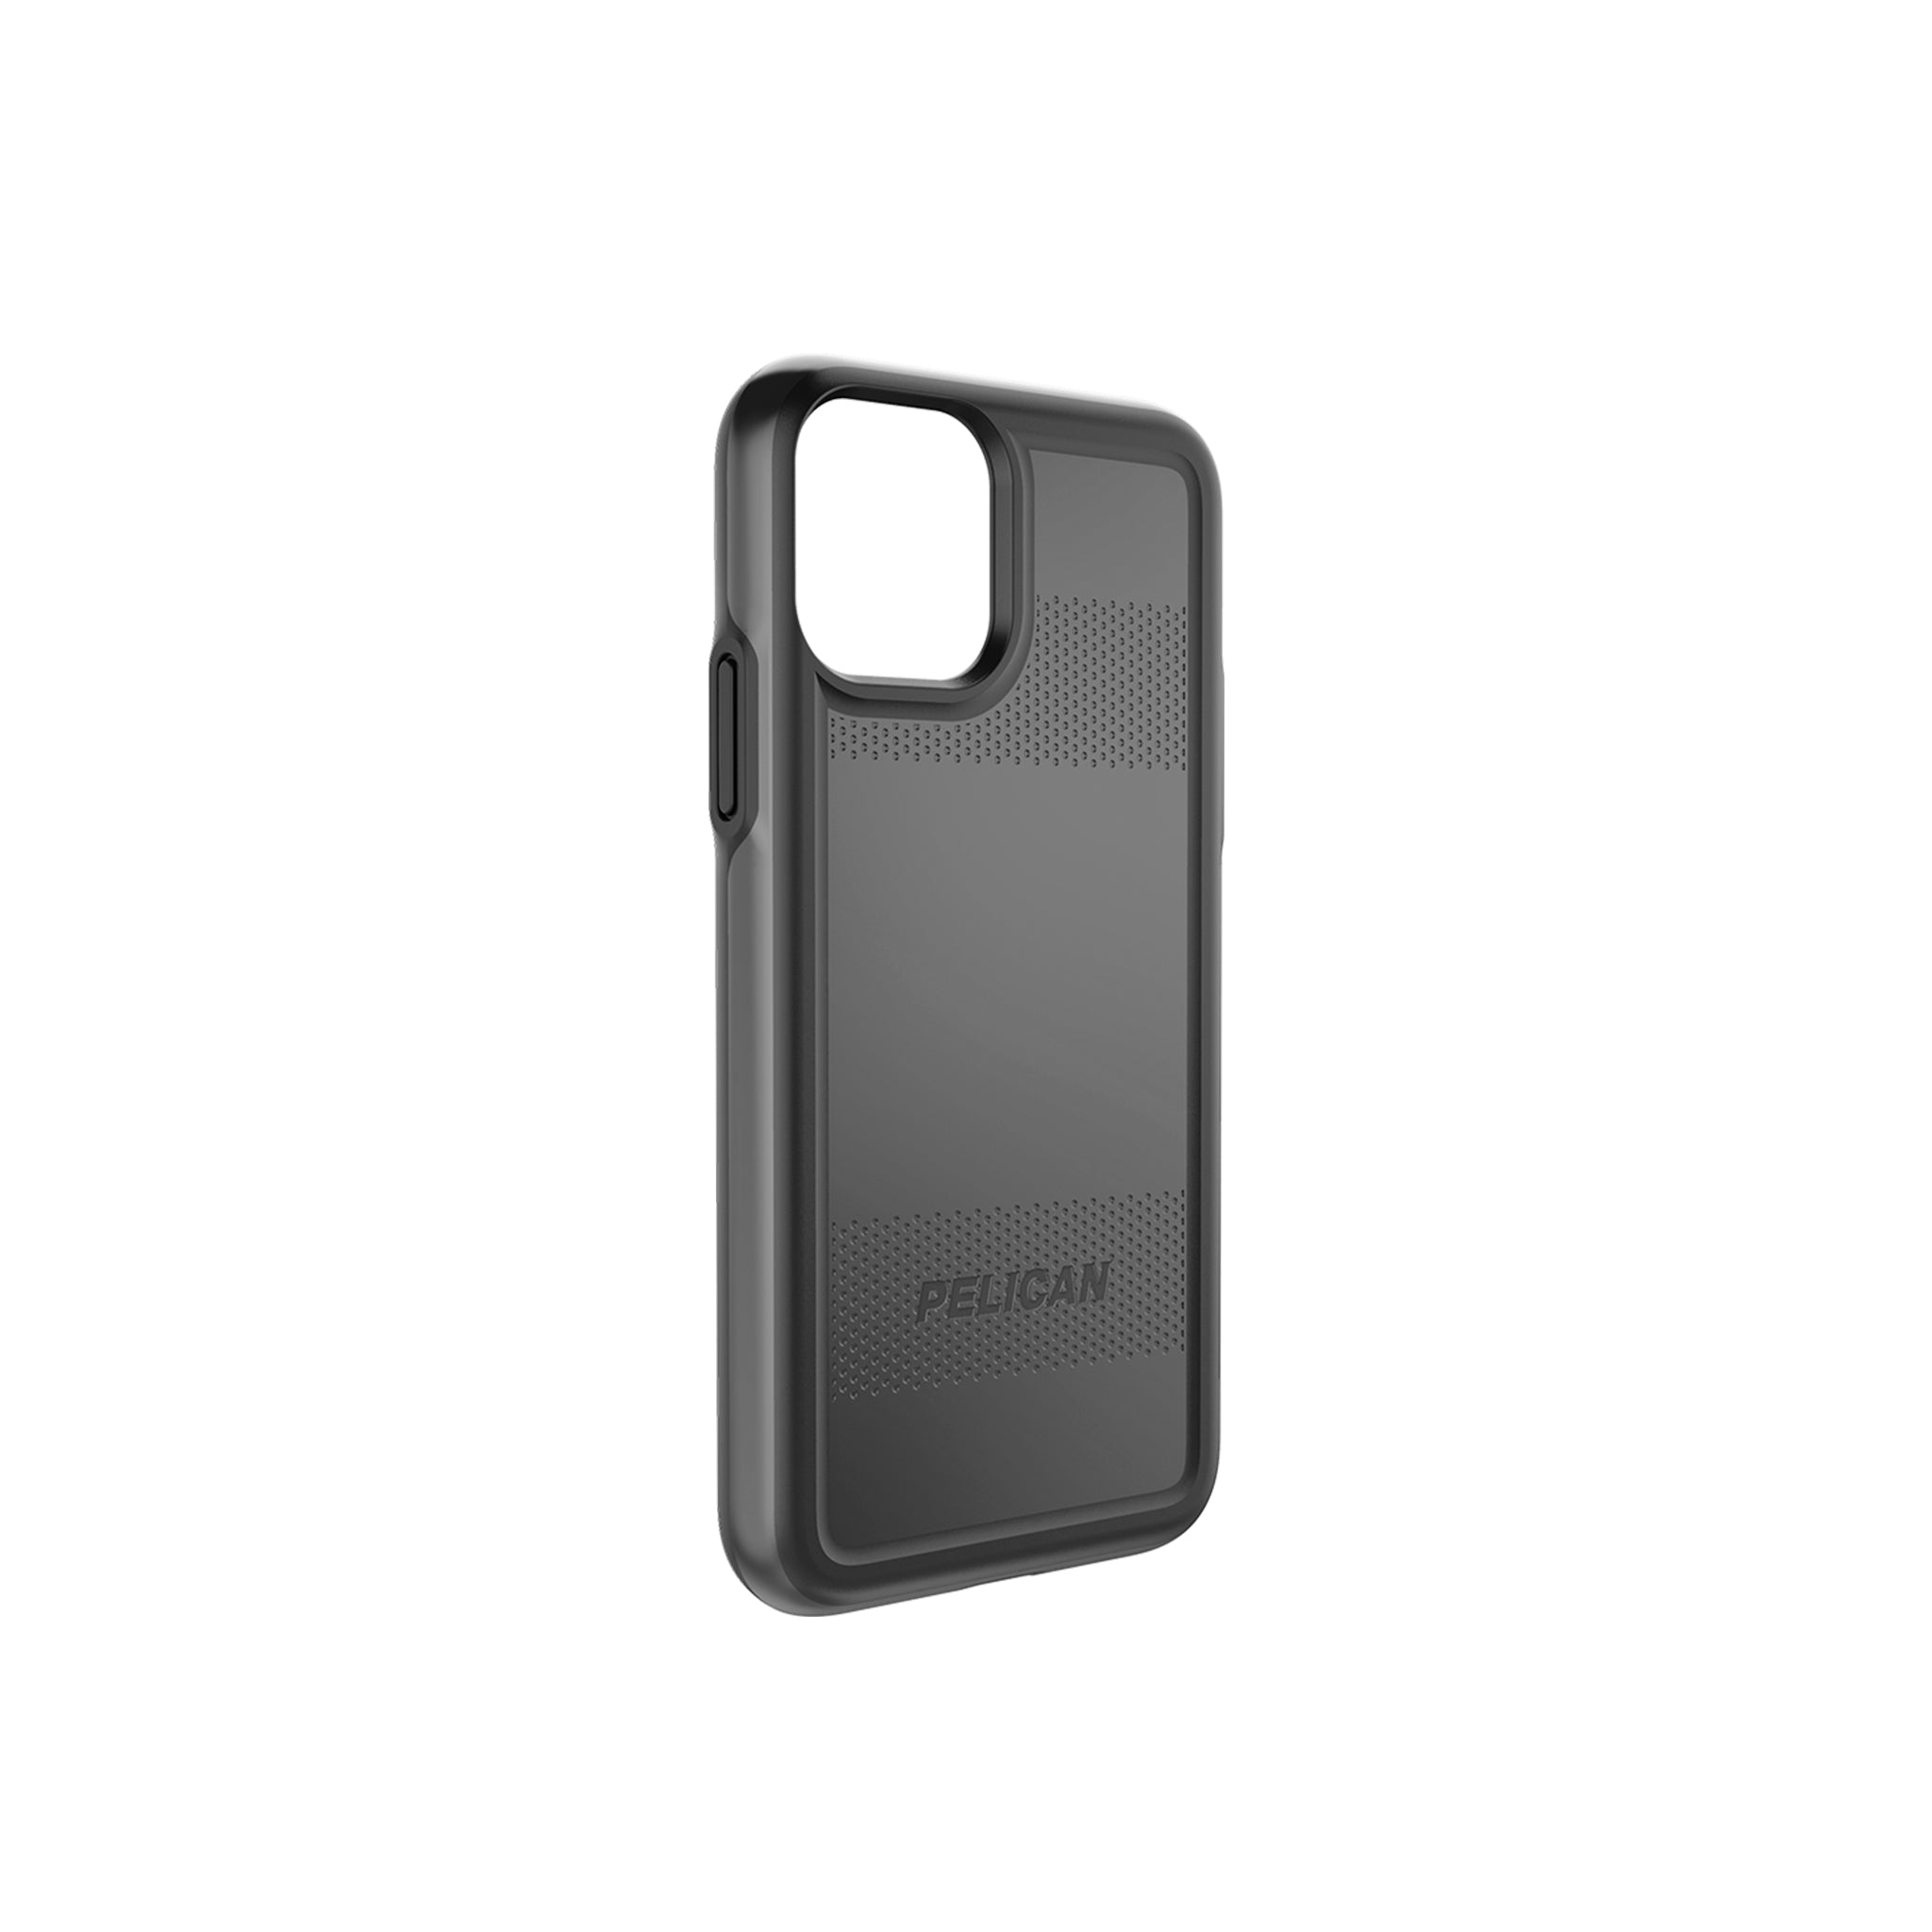 Pelican - Protector Case For Apple iPhone 11 Pro / Xs / X - Black